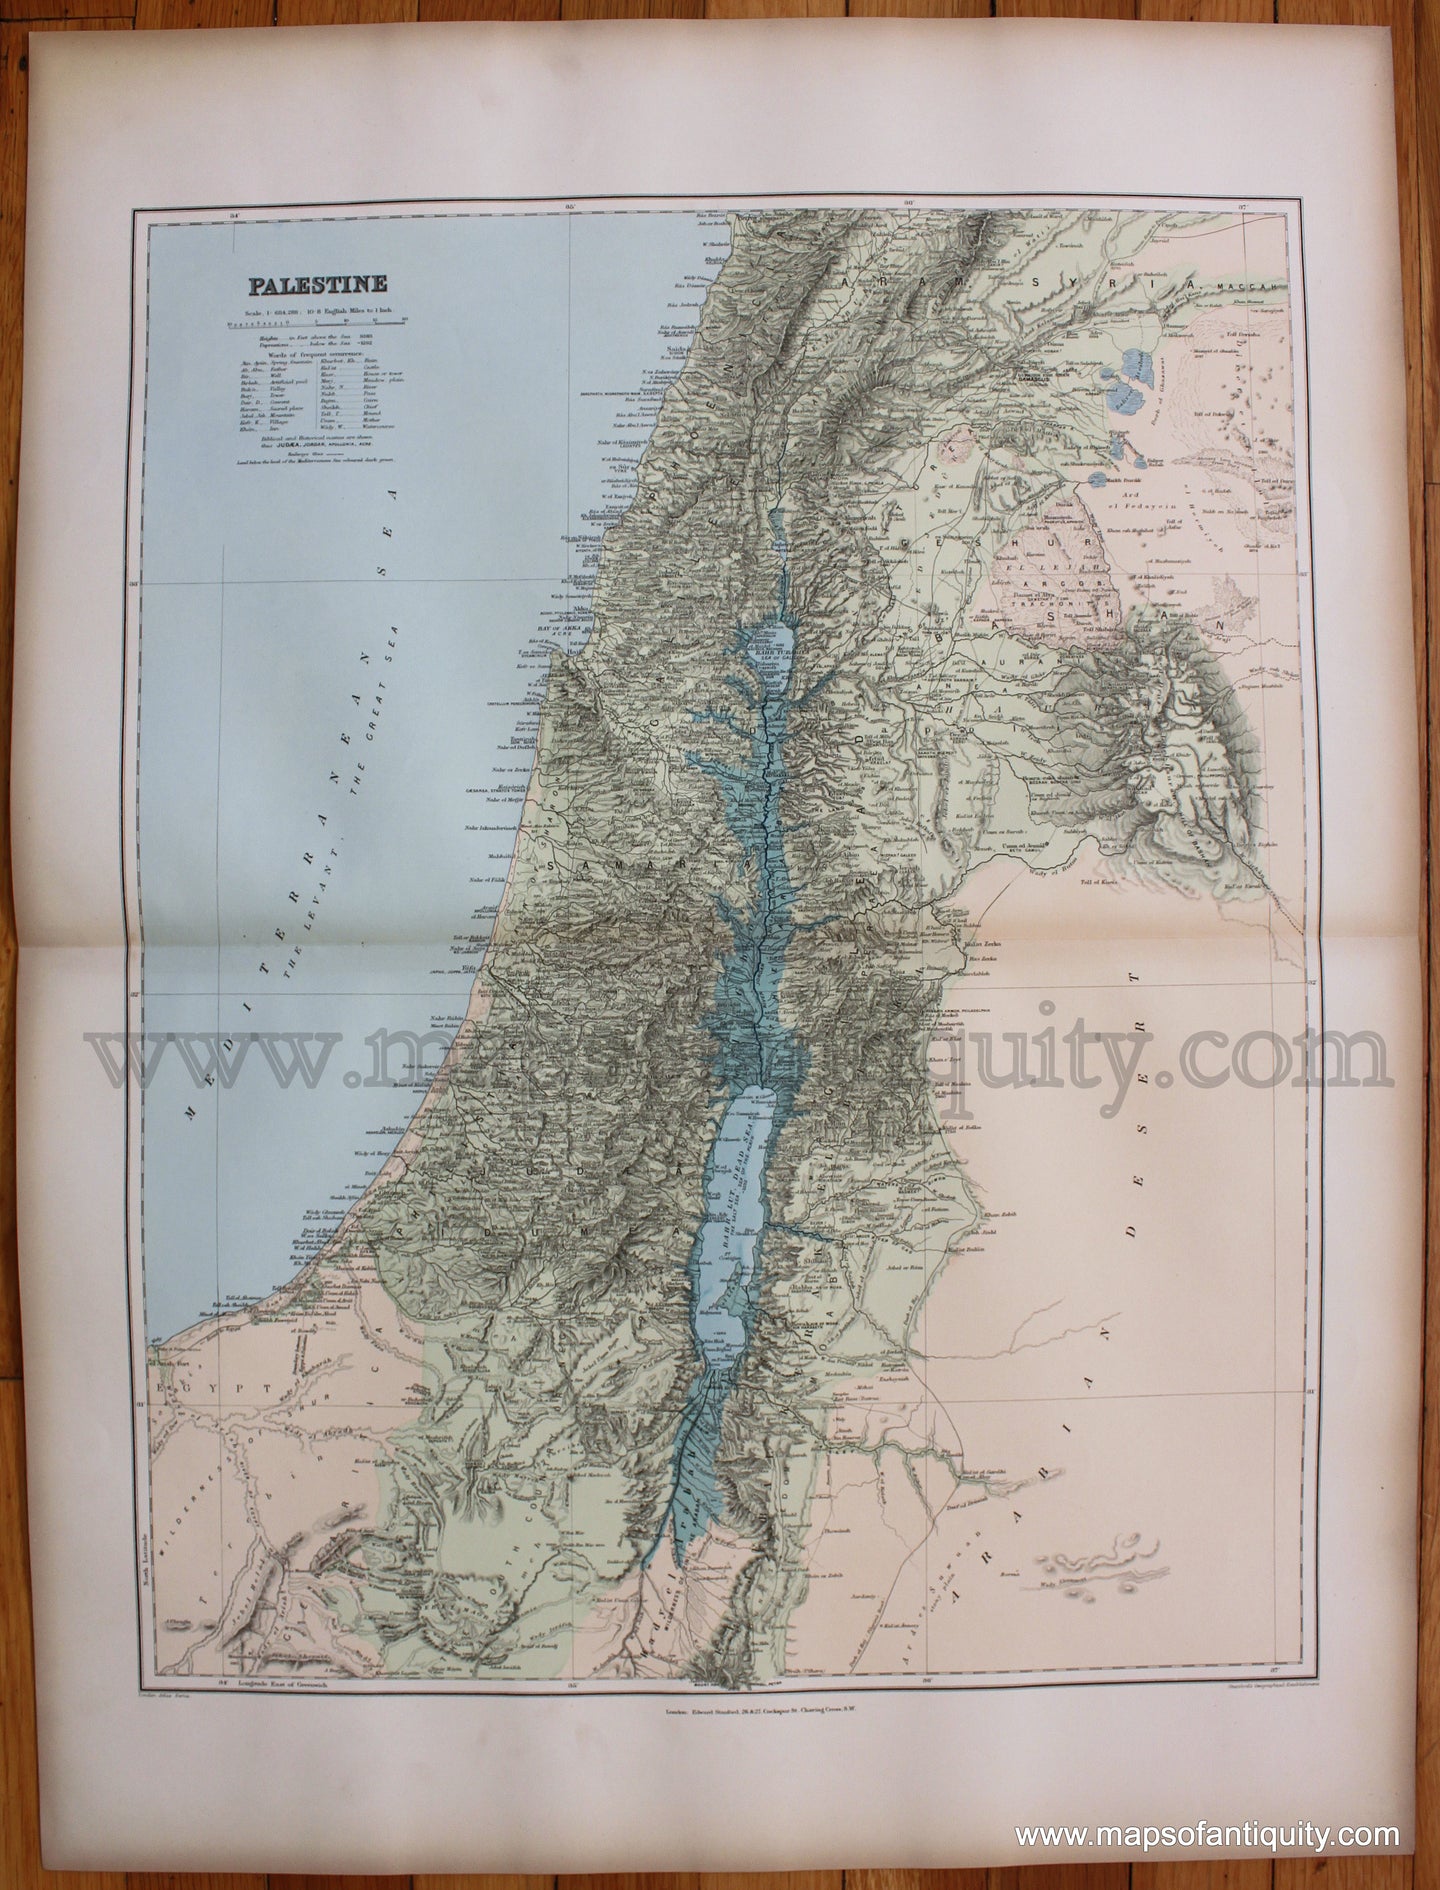 Printed-Color-Antique-Map-Palestine-1904-Stanford-1800s-19th-century-Maps-of-Antiquity